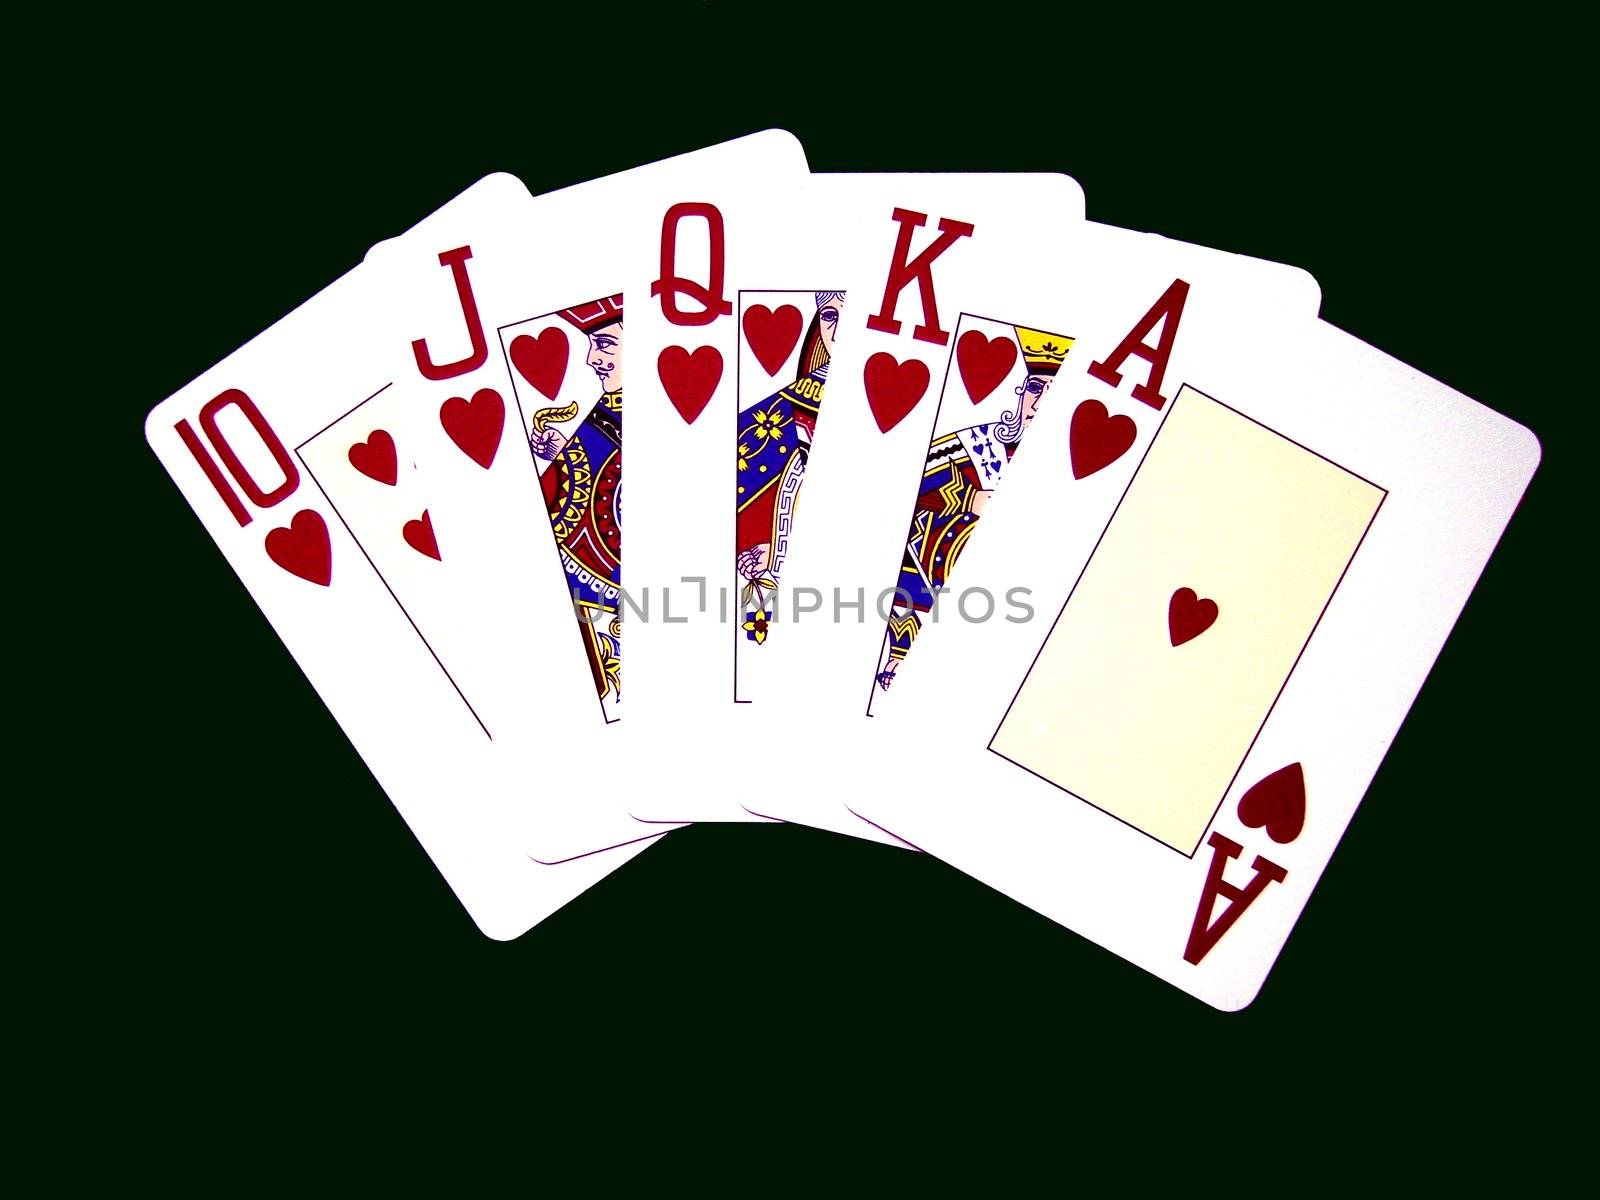 Royal Flush on a wooden table winning hand